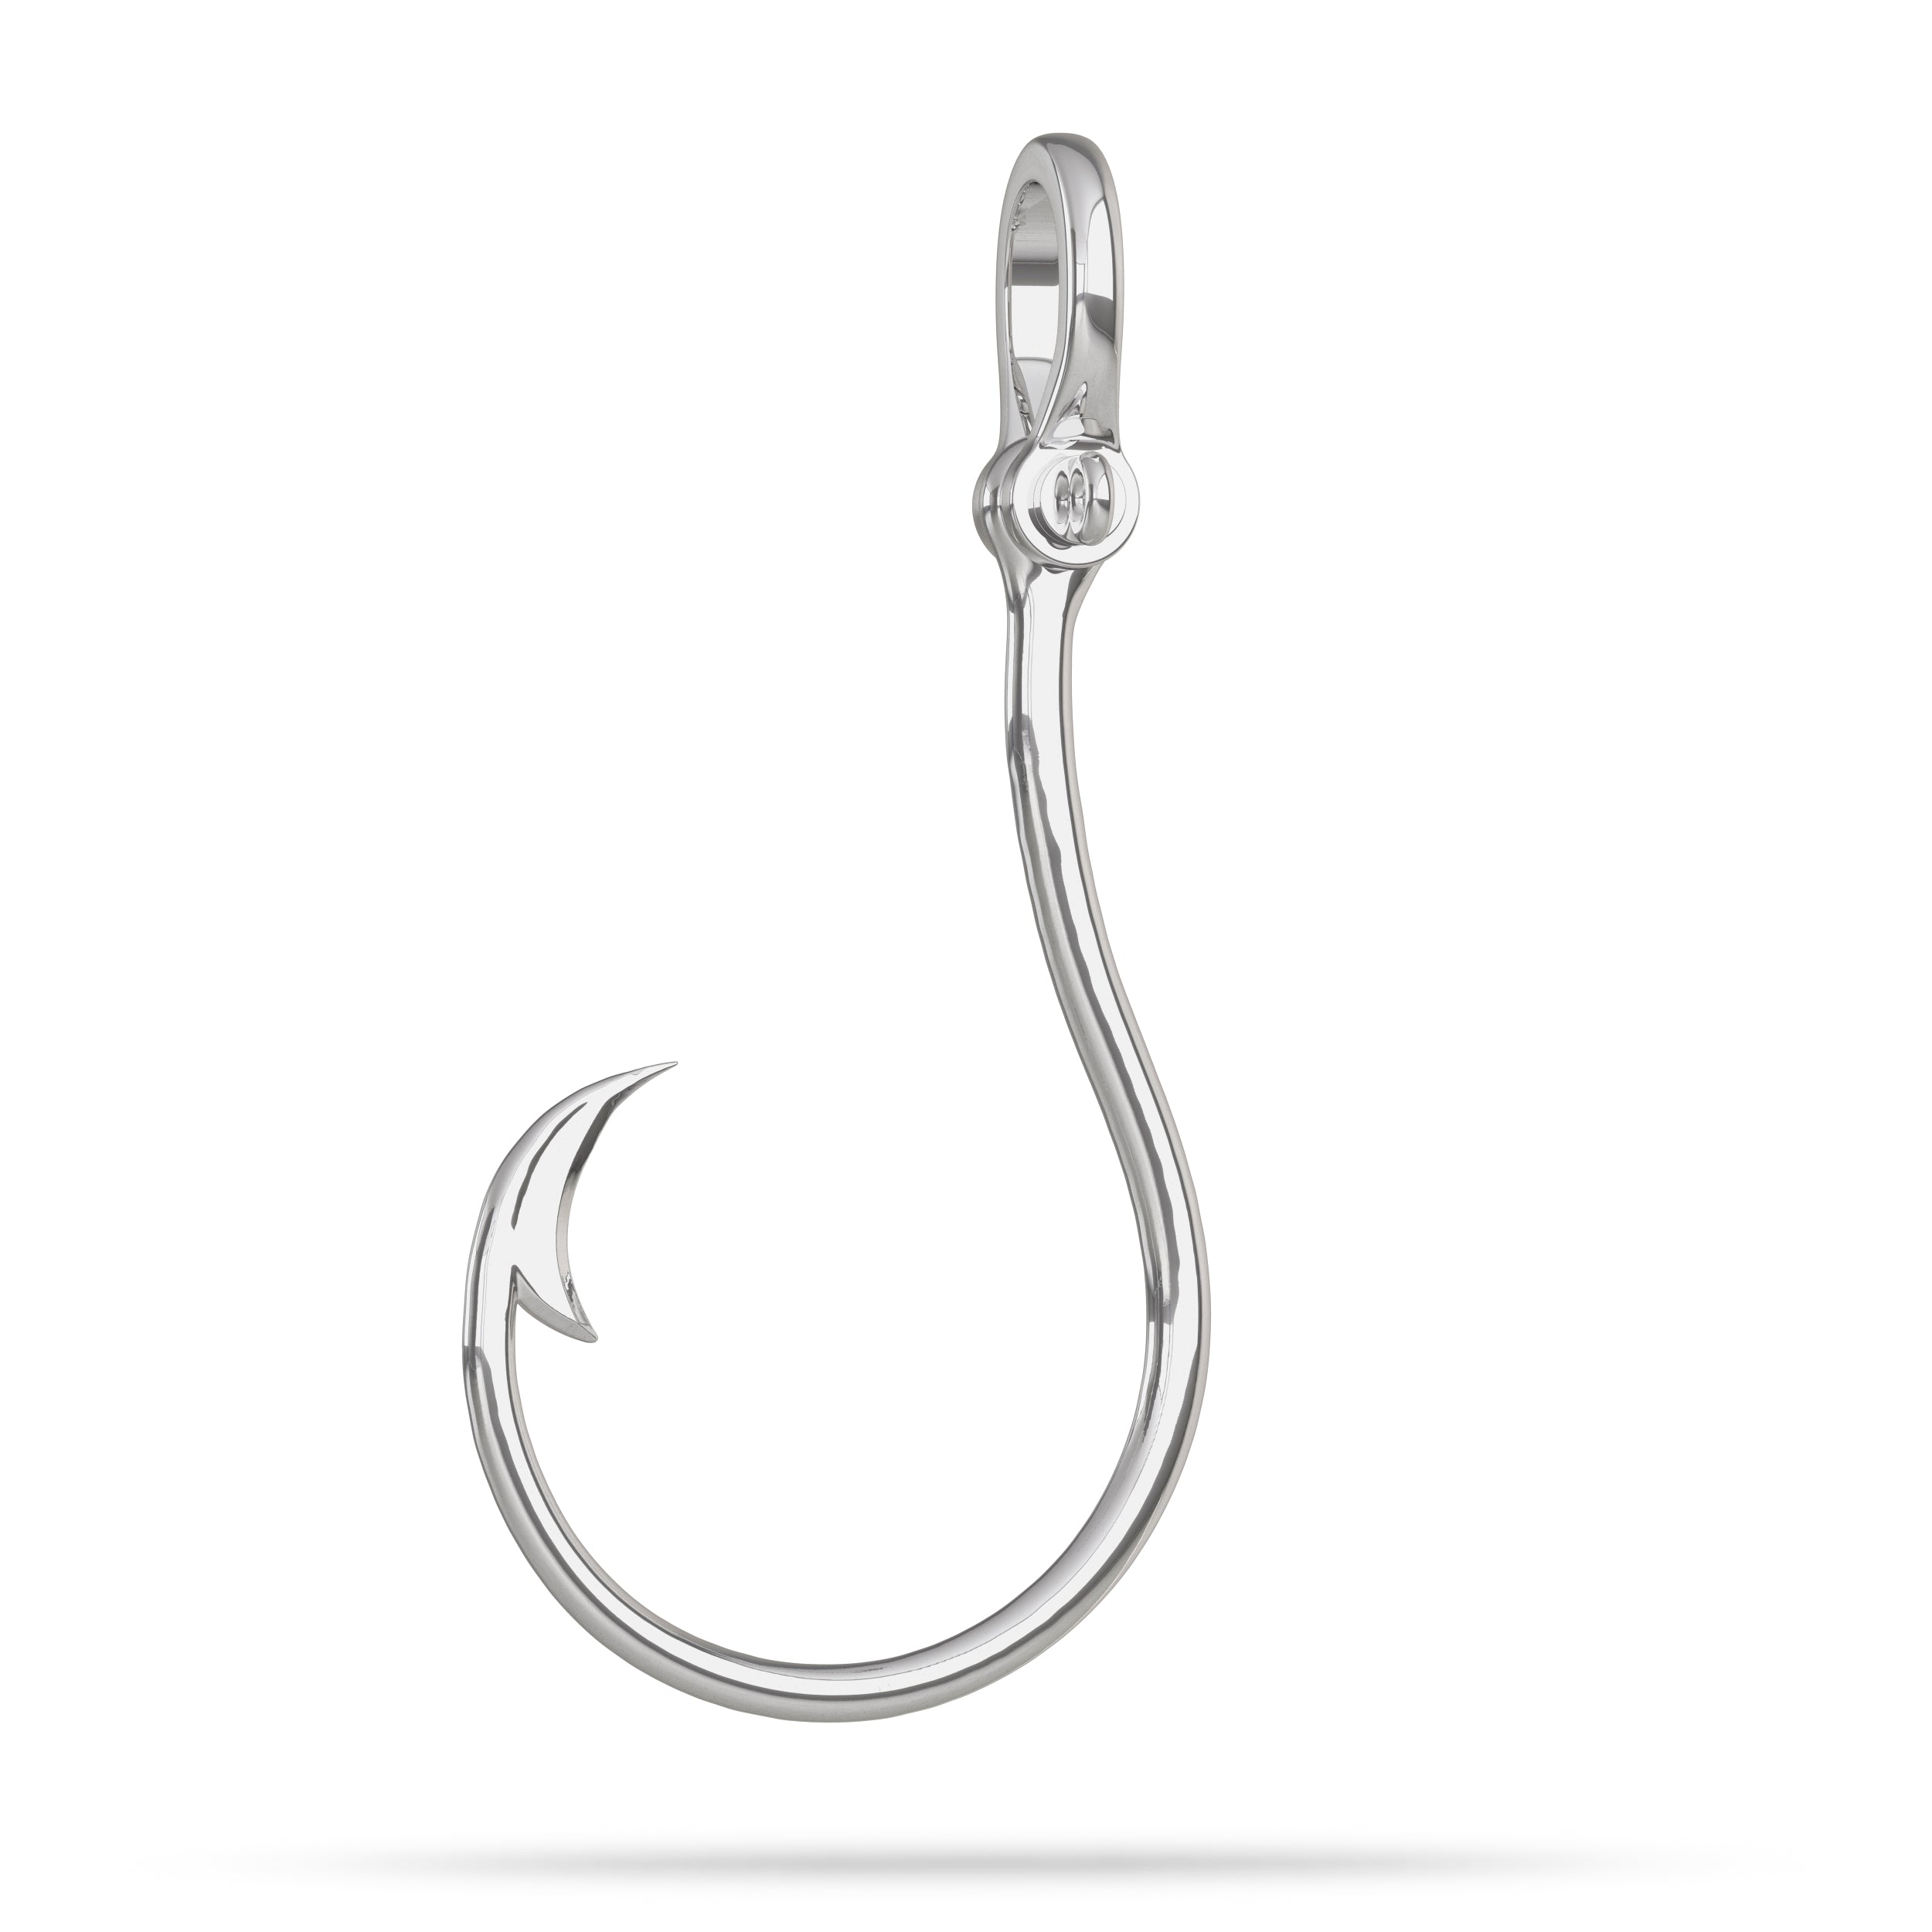 Circle Fish Hook with Shackle Pendant I Nautical Treasure Jewelry Sterling Silver / Large (48mm) by Nautical Treasure Jewelry